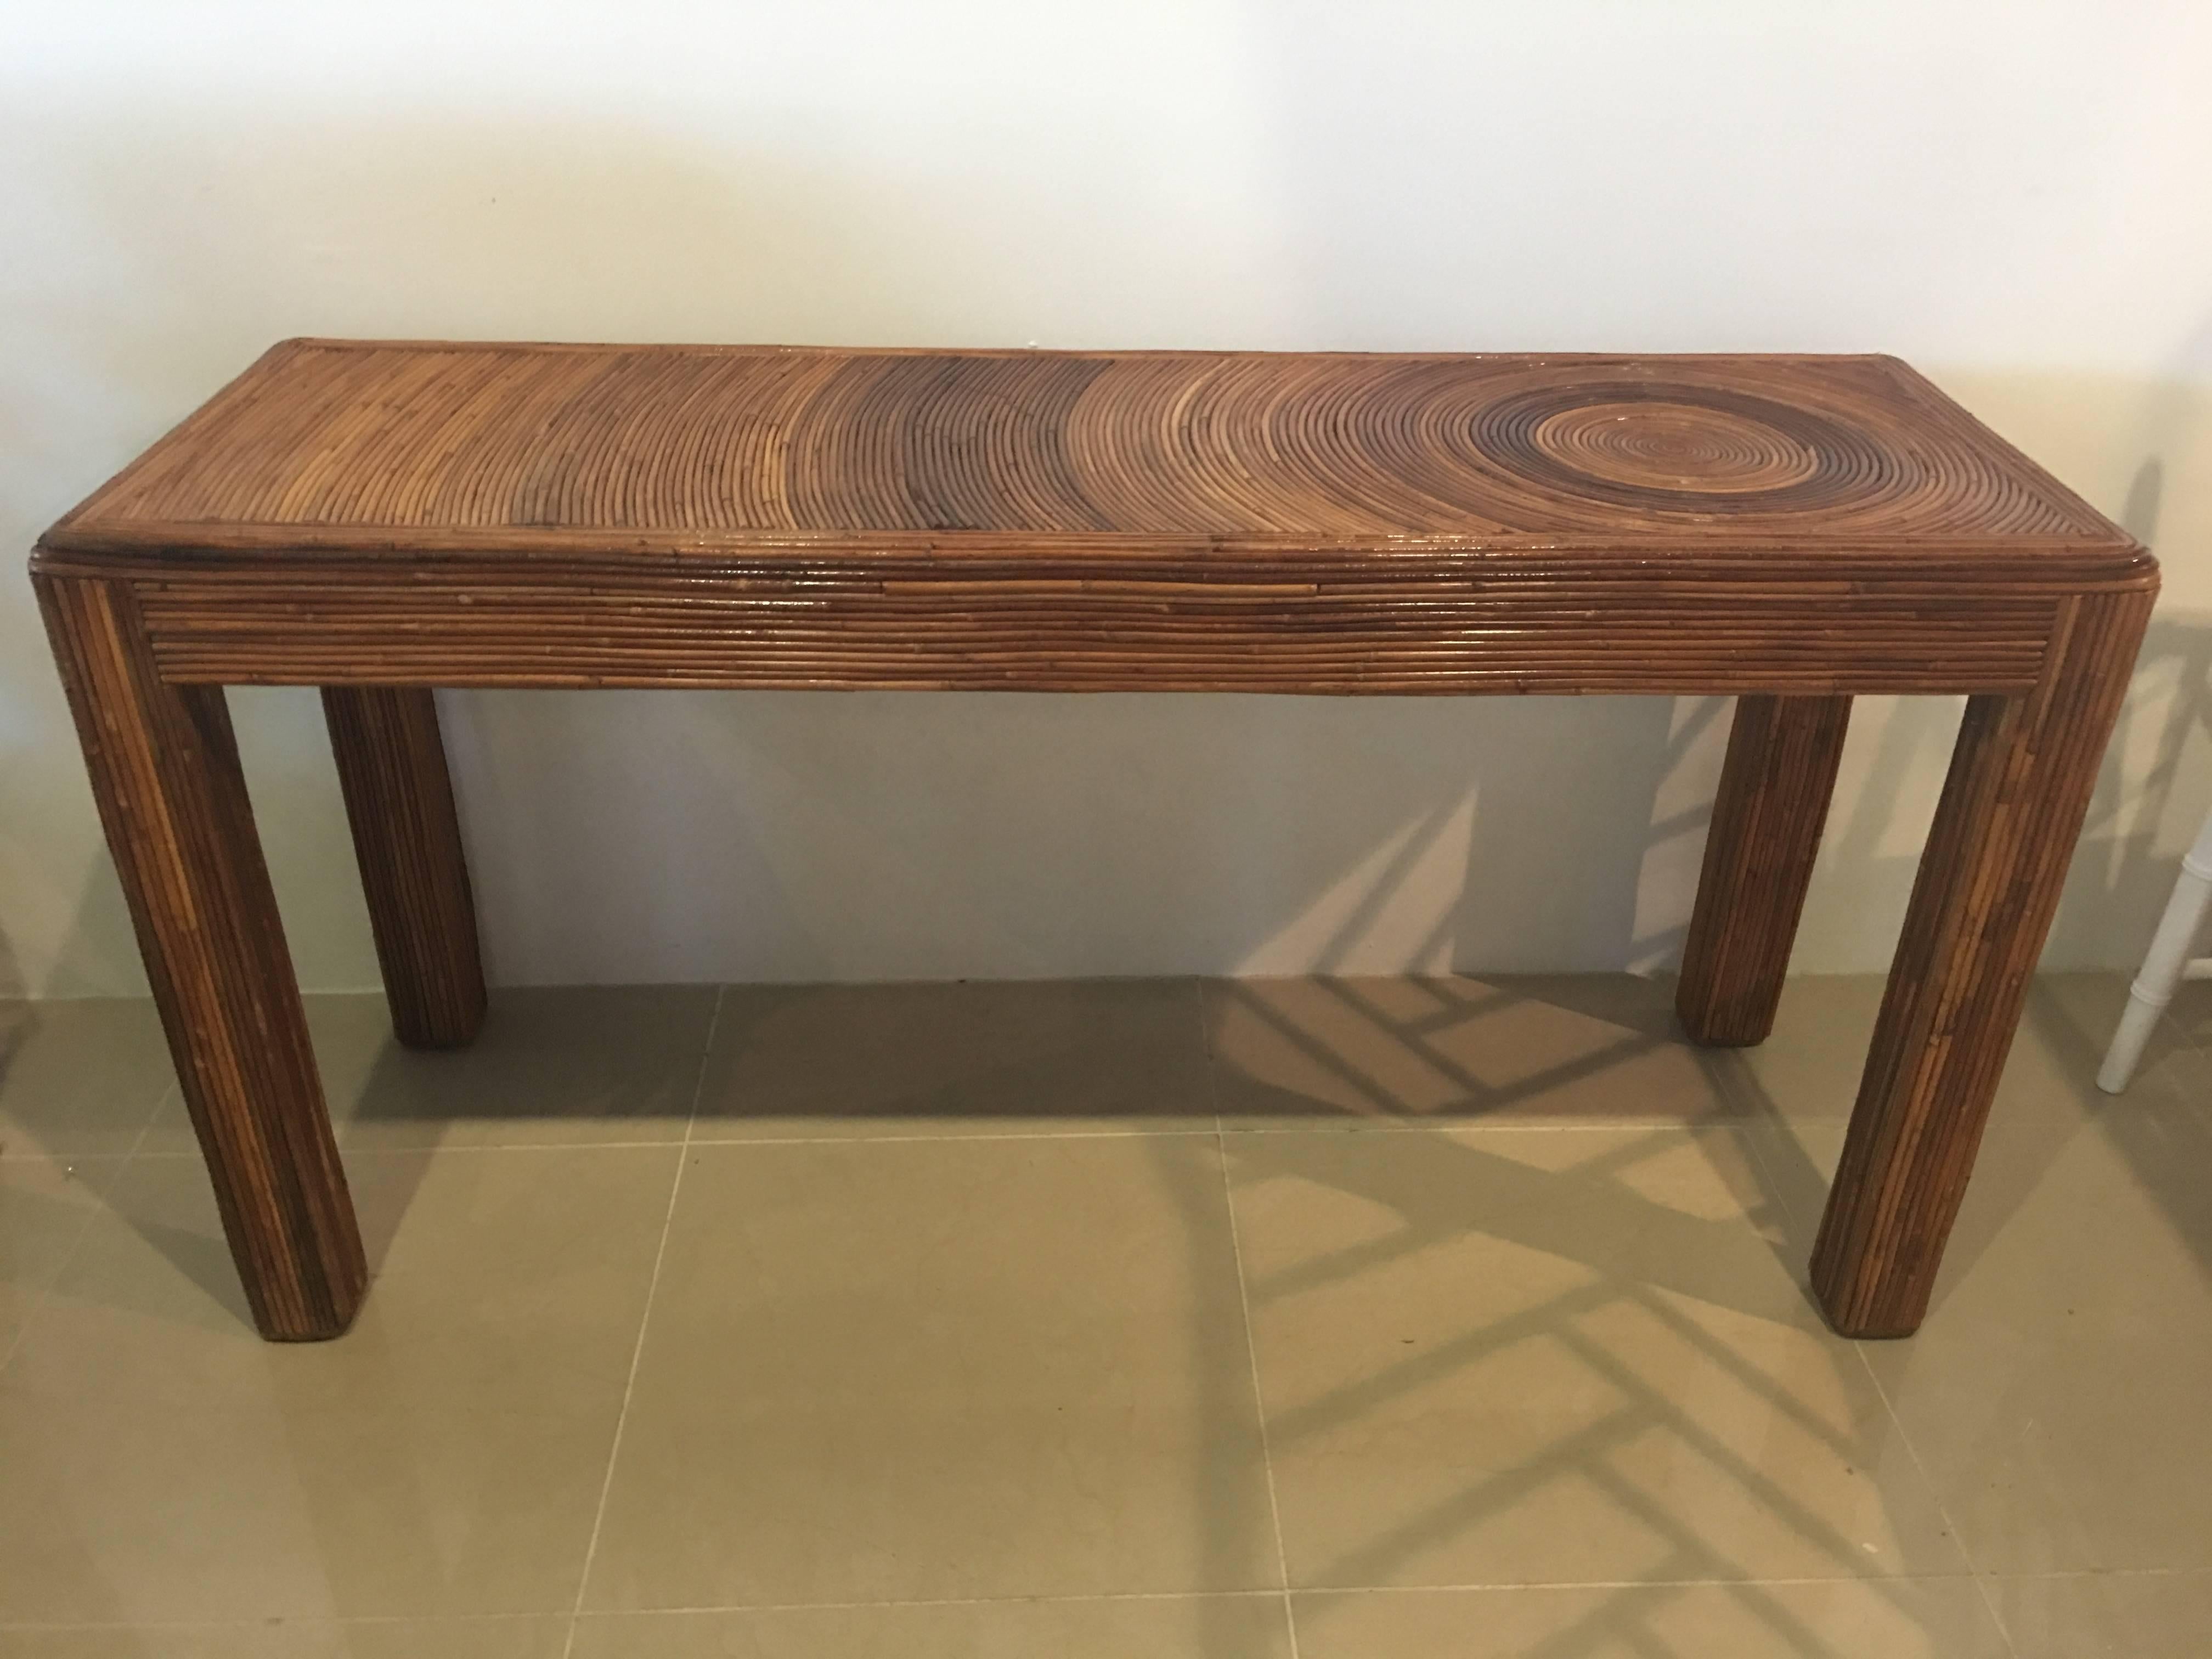 Vintage pencil reed bamboo console table. Great tropical Palm beach piece. Original vintage finish.